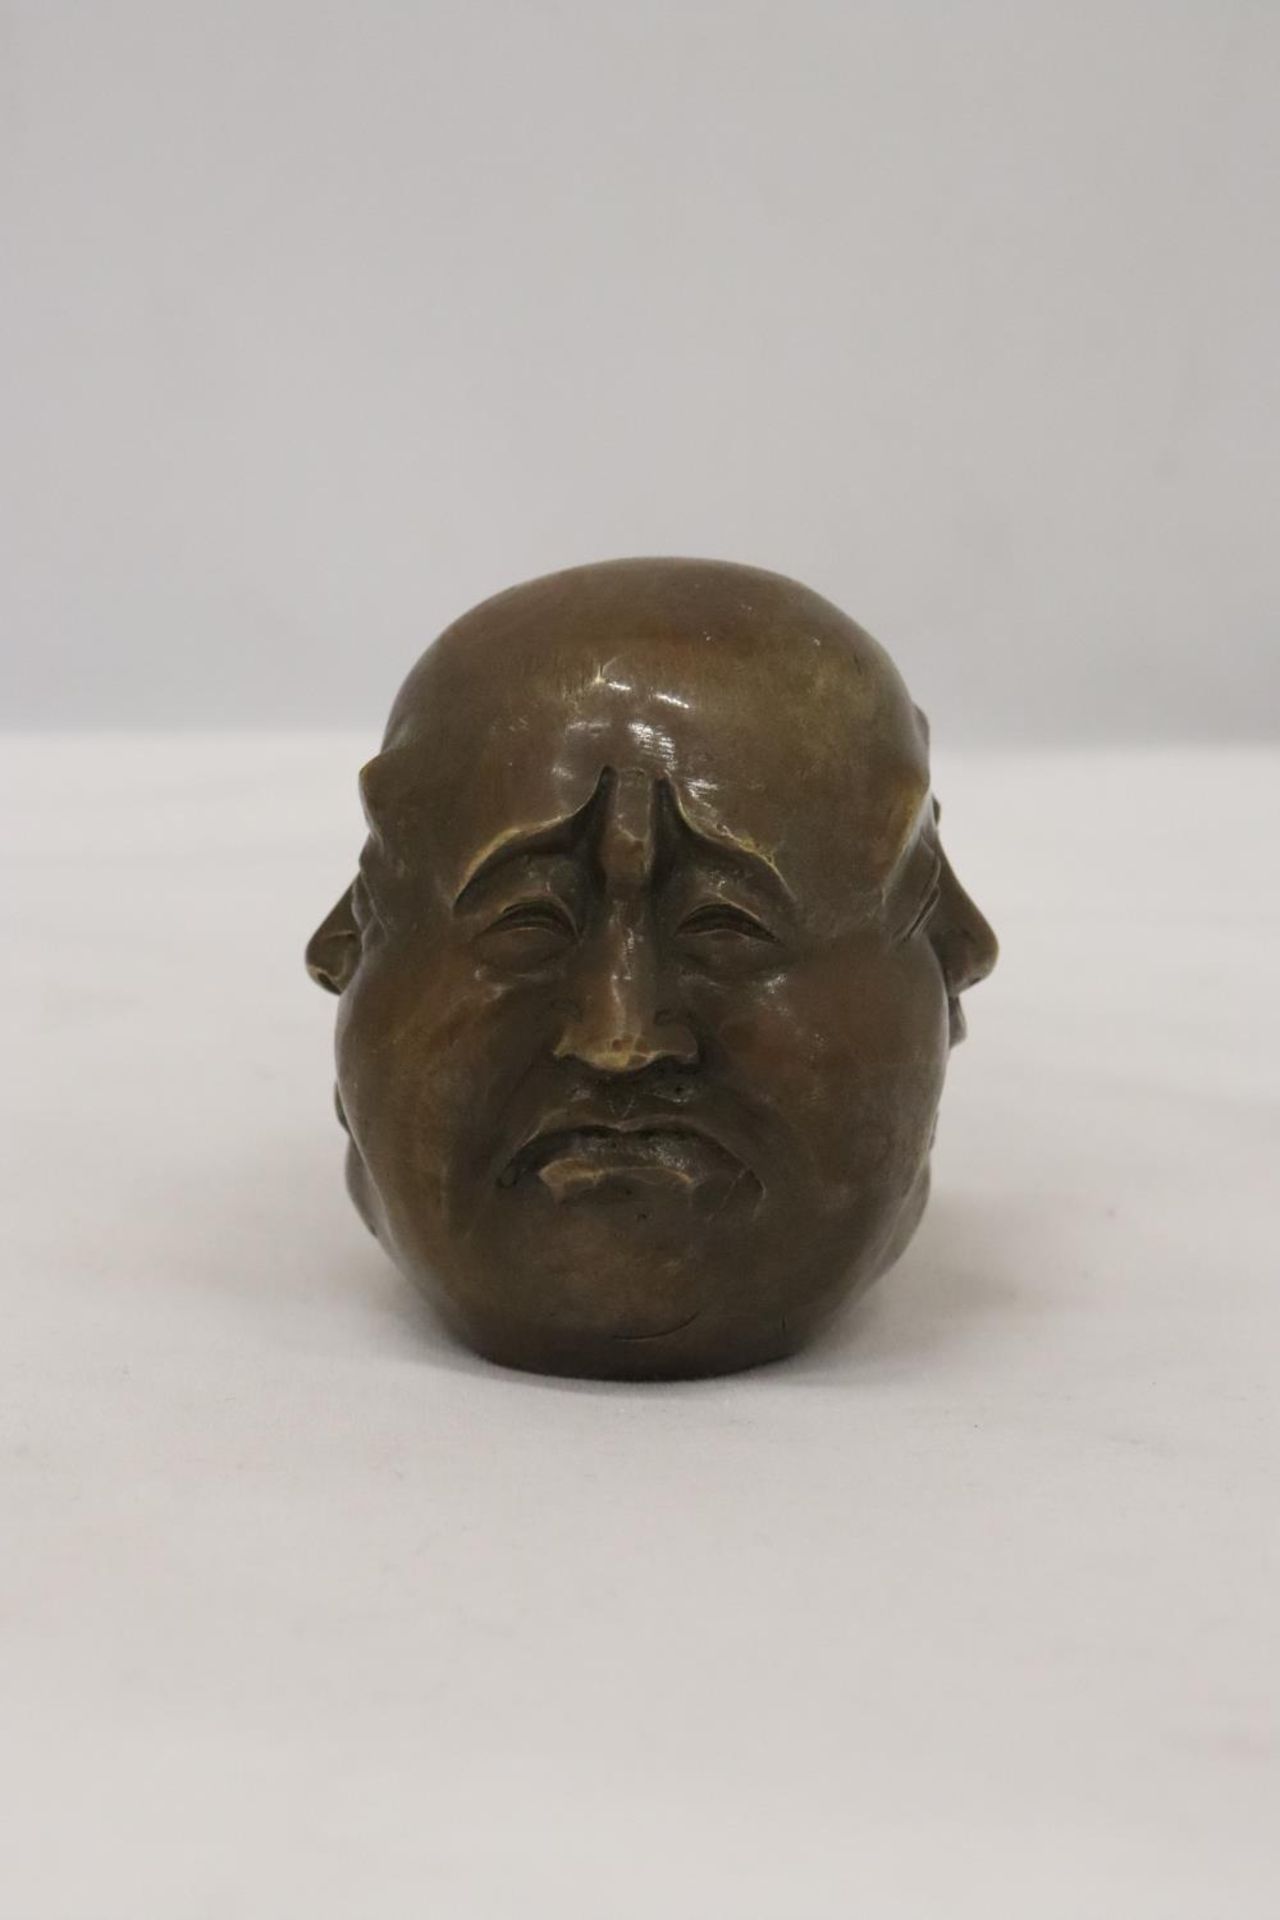 ABRONZE FOUR FACED BUDDAH, HEIGHT 8CM - Image 3 of 5